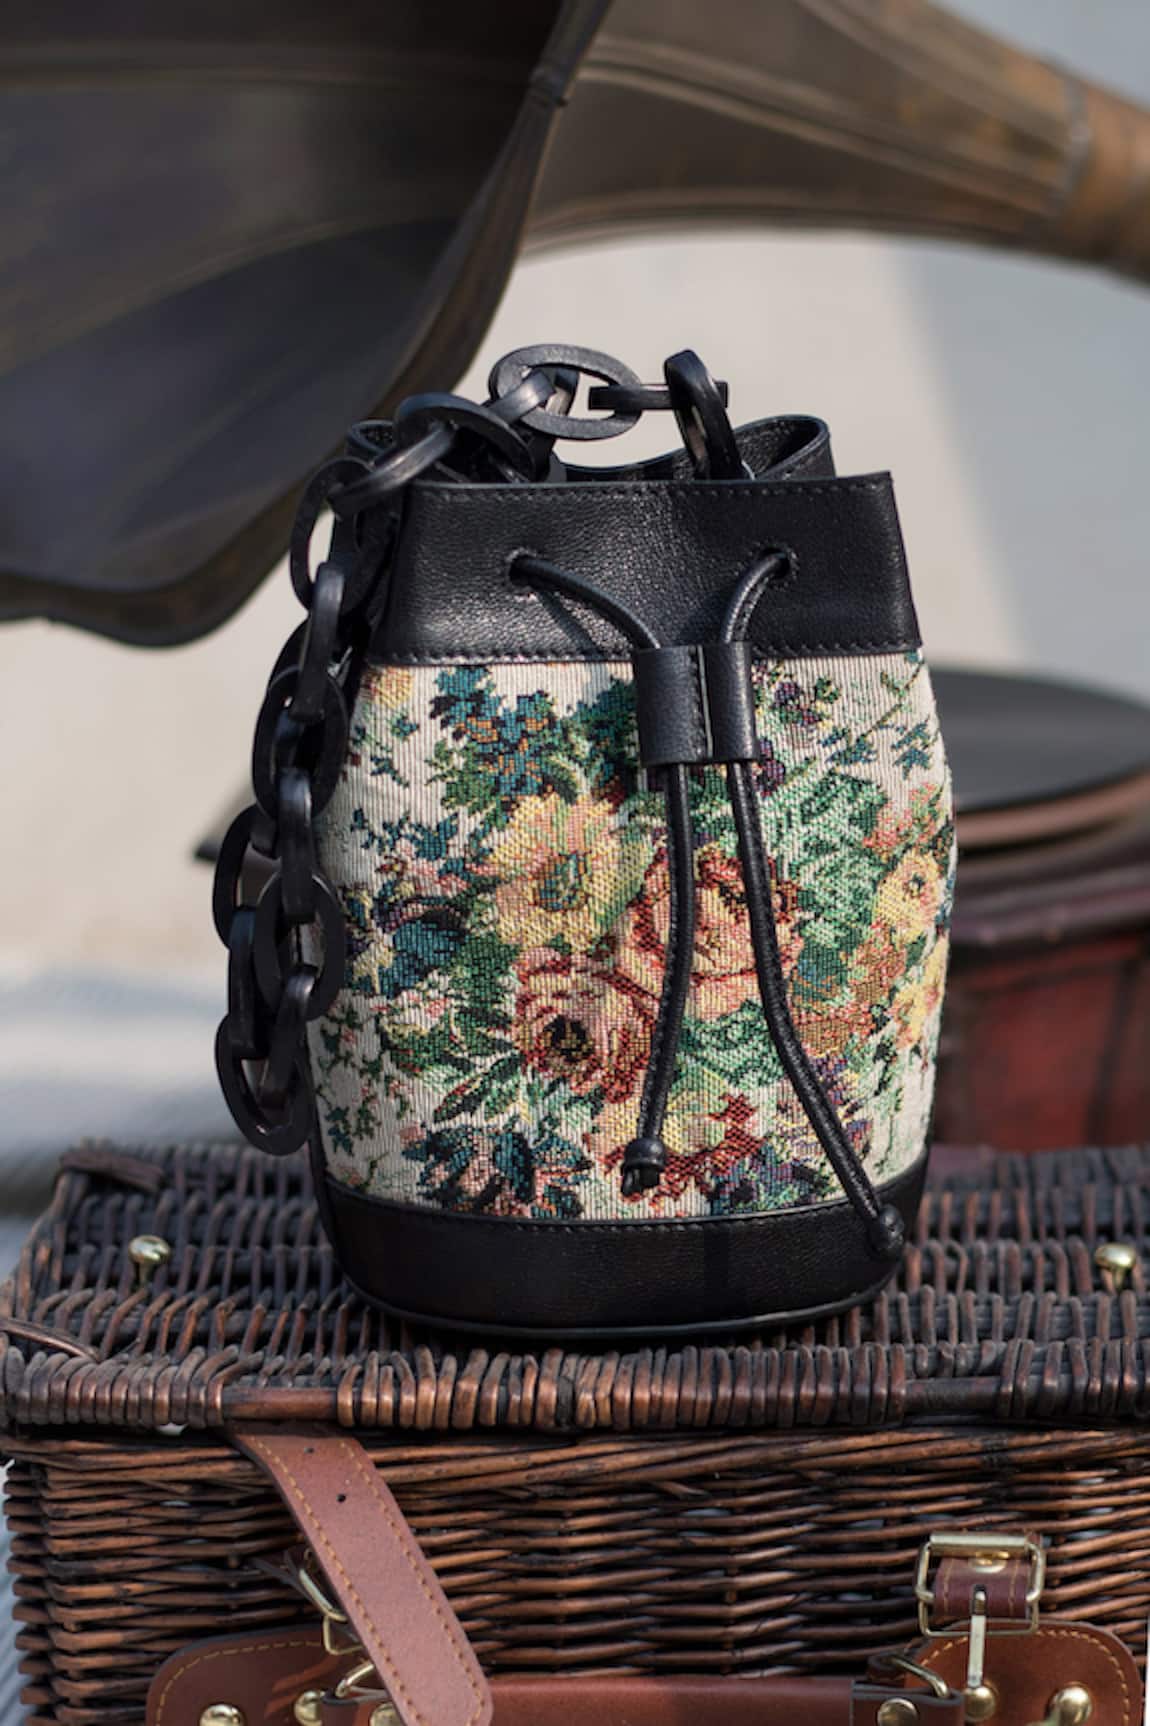 The Leather Garden Floral Embroidered Bucket Bag